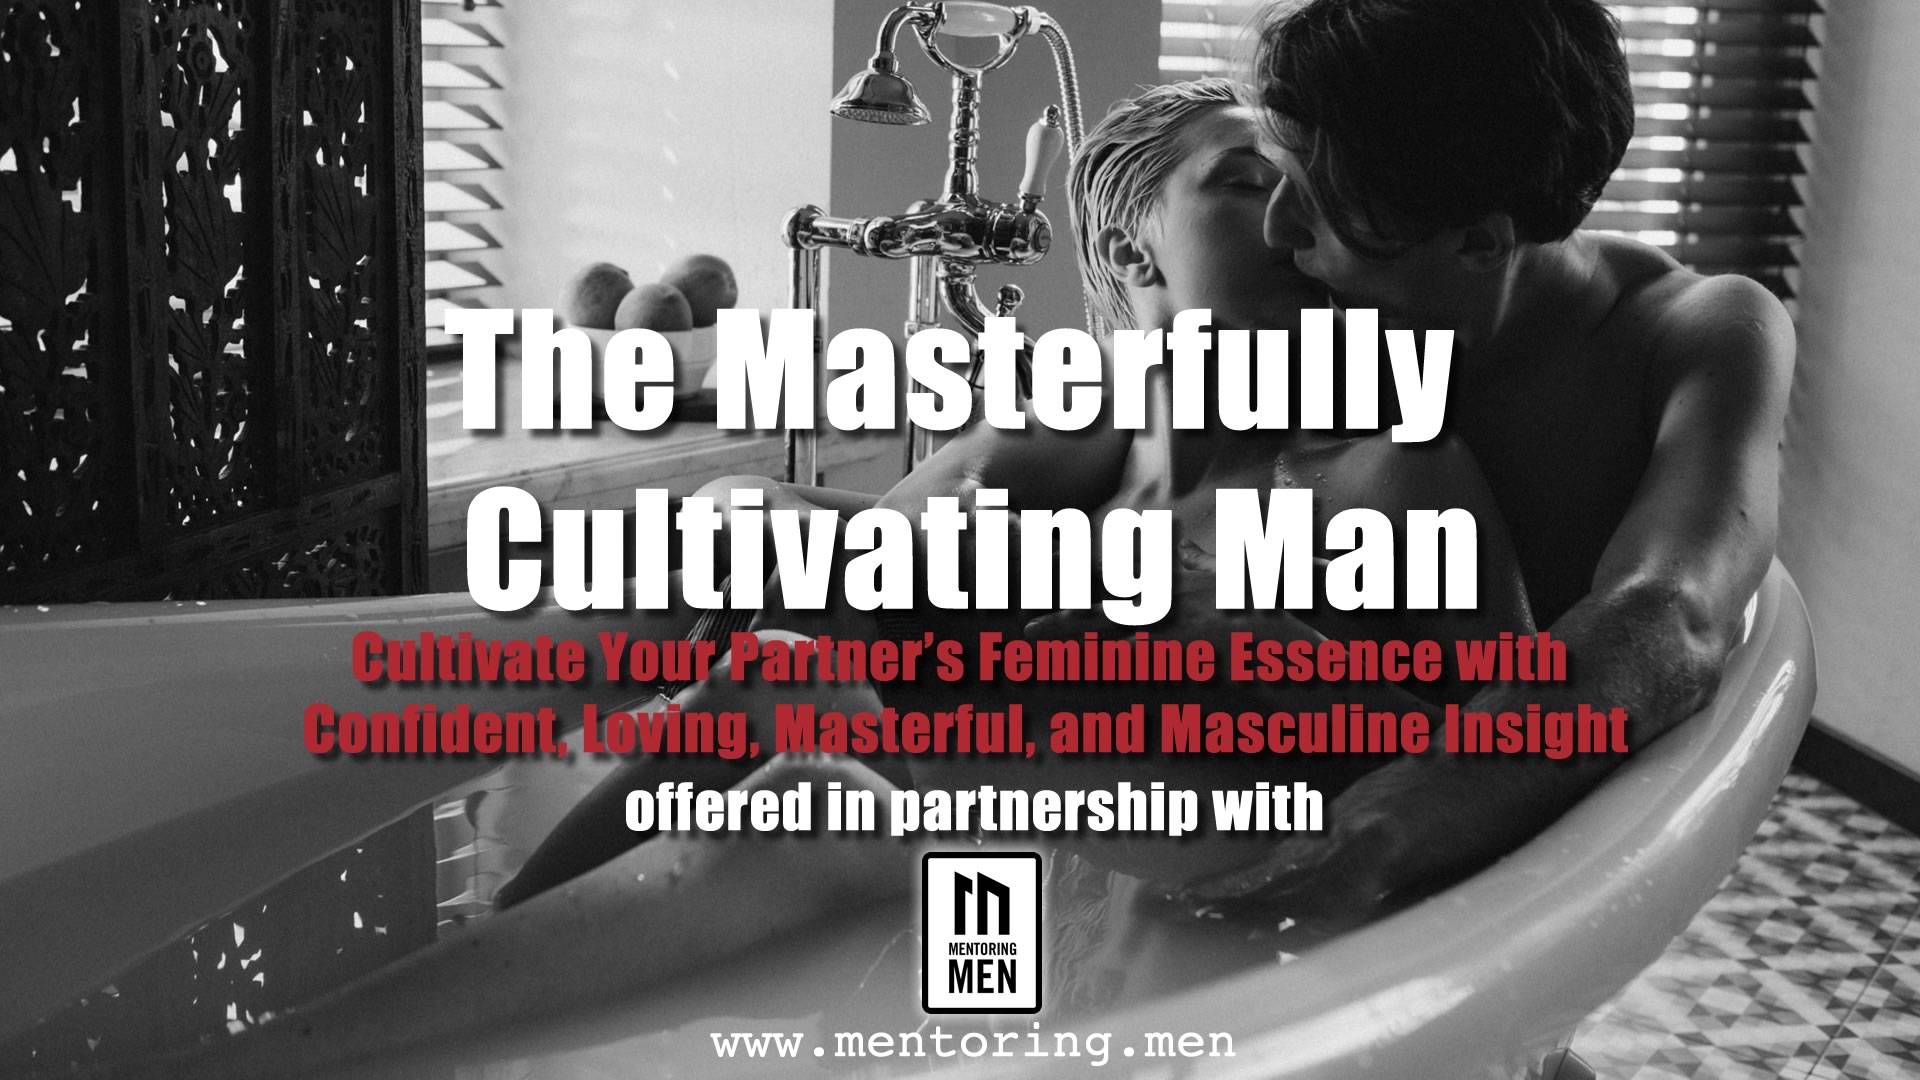 Cultivate Your Woman's Feminine Essence with Confident, Loving, Masterful, and Masculine Insight